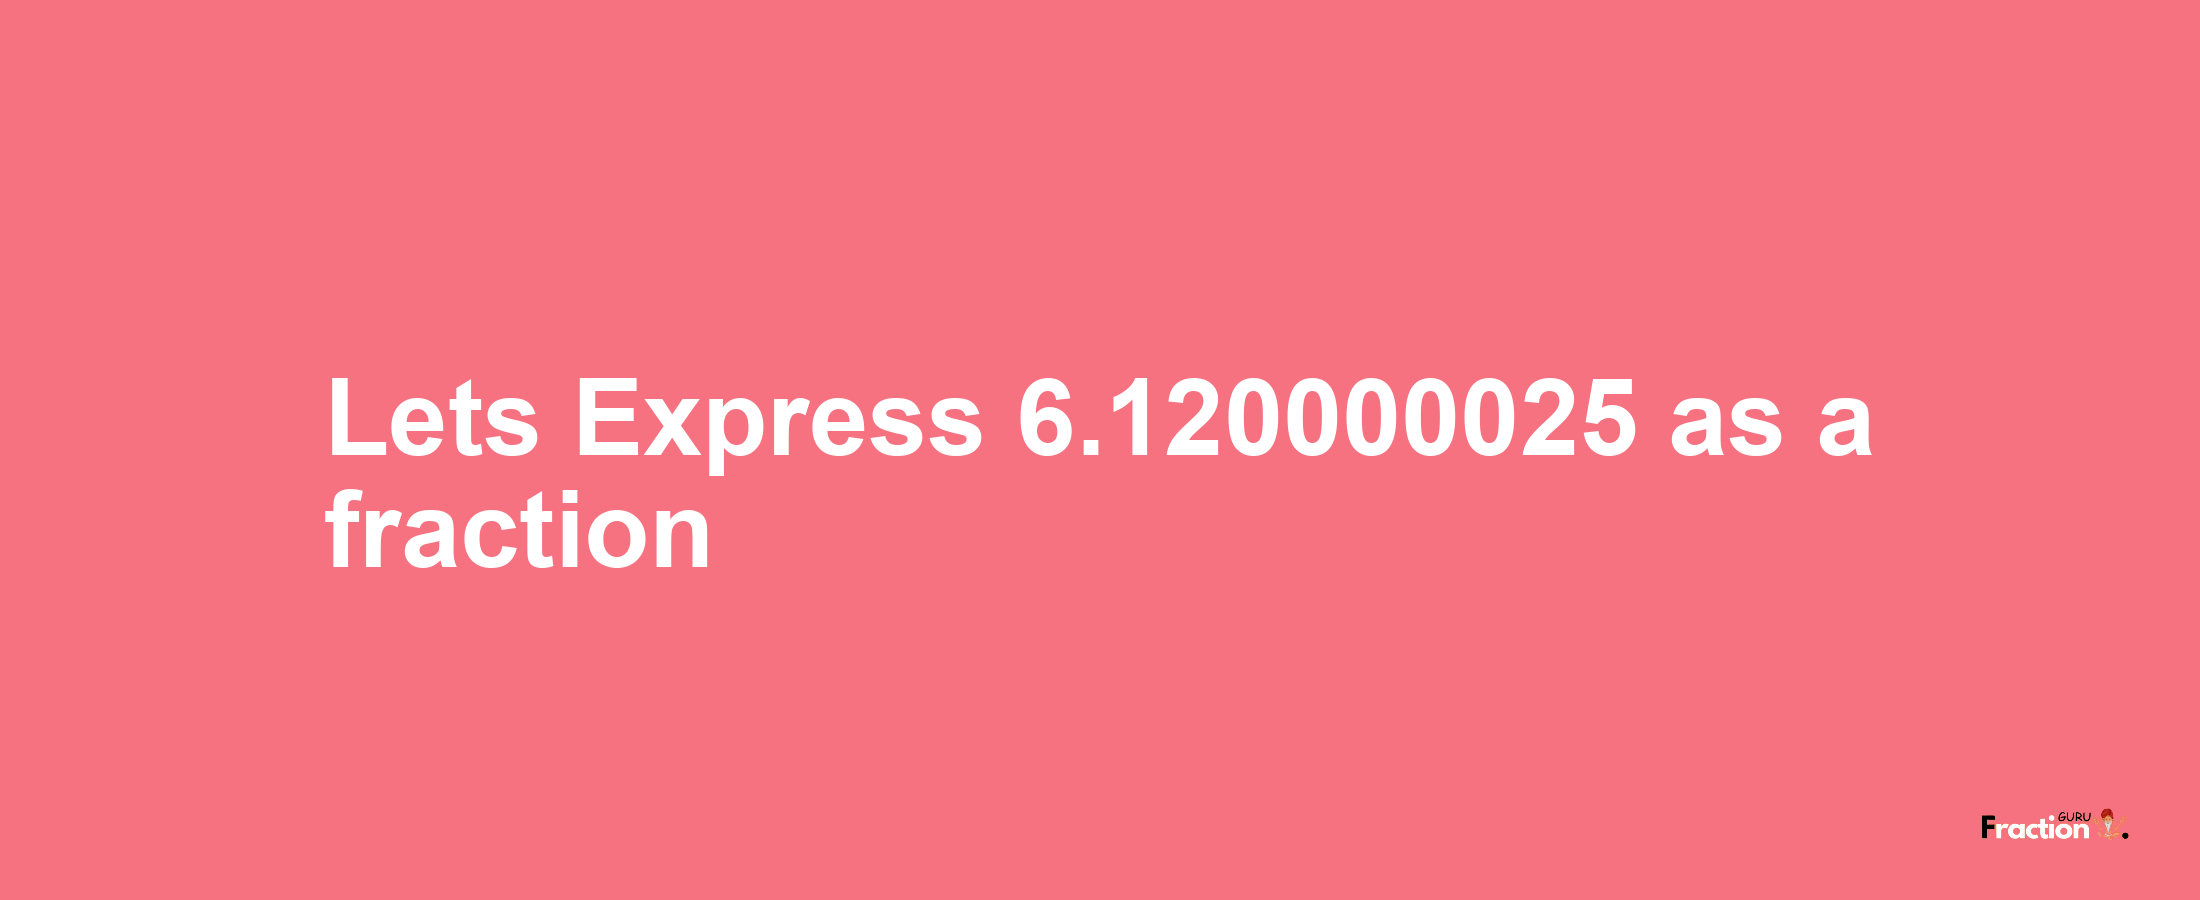 Lets Express 6.120000025 as afraction